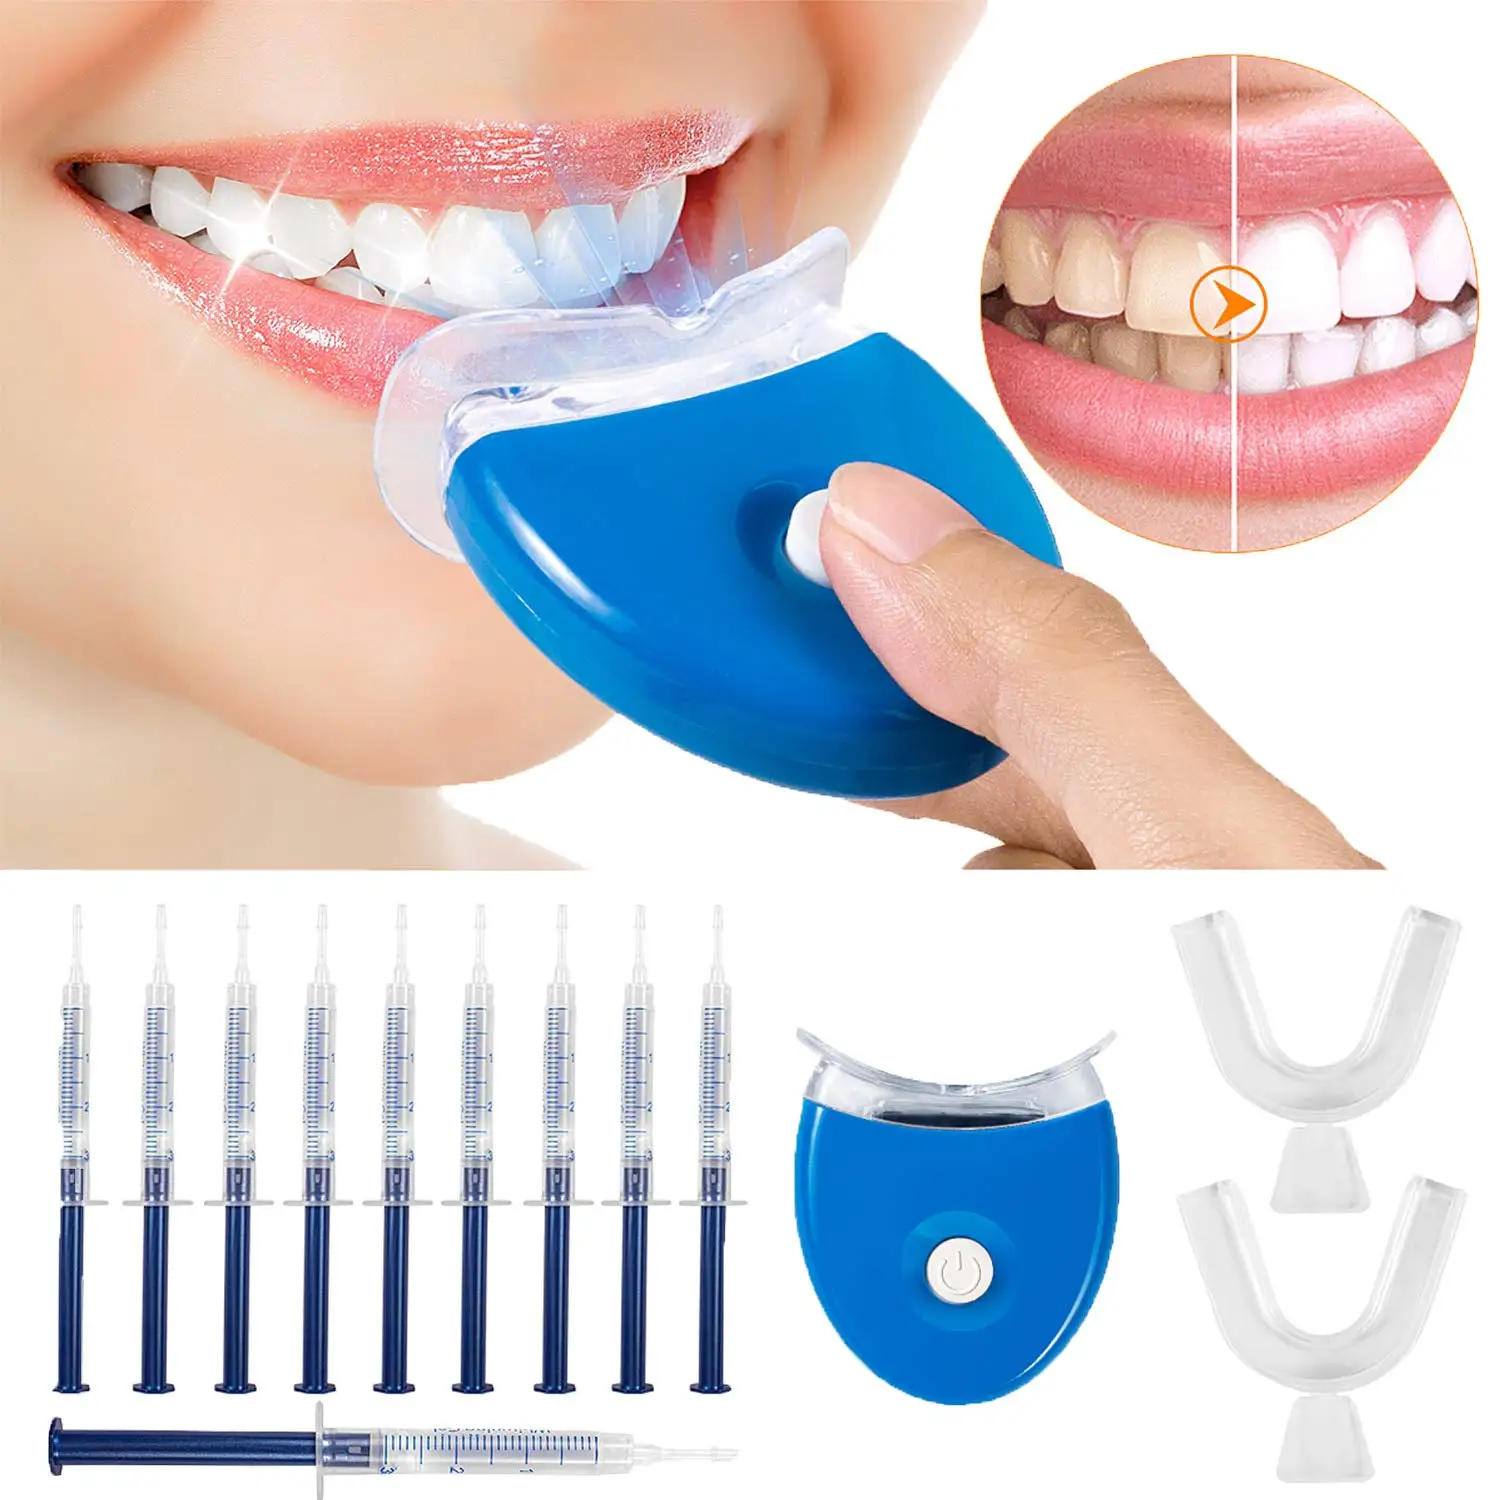 

2021 Best seller in USA professional at home dental care teeth whitening kit private label